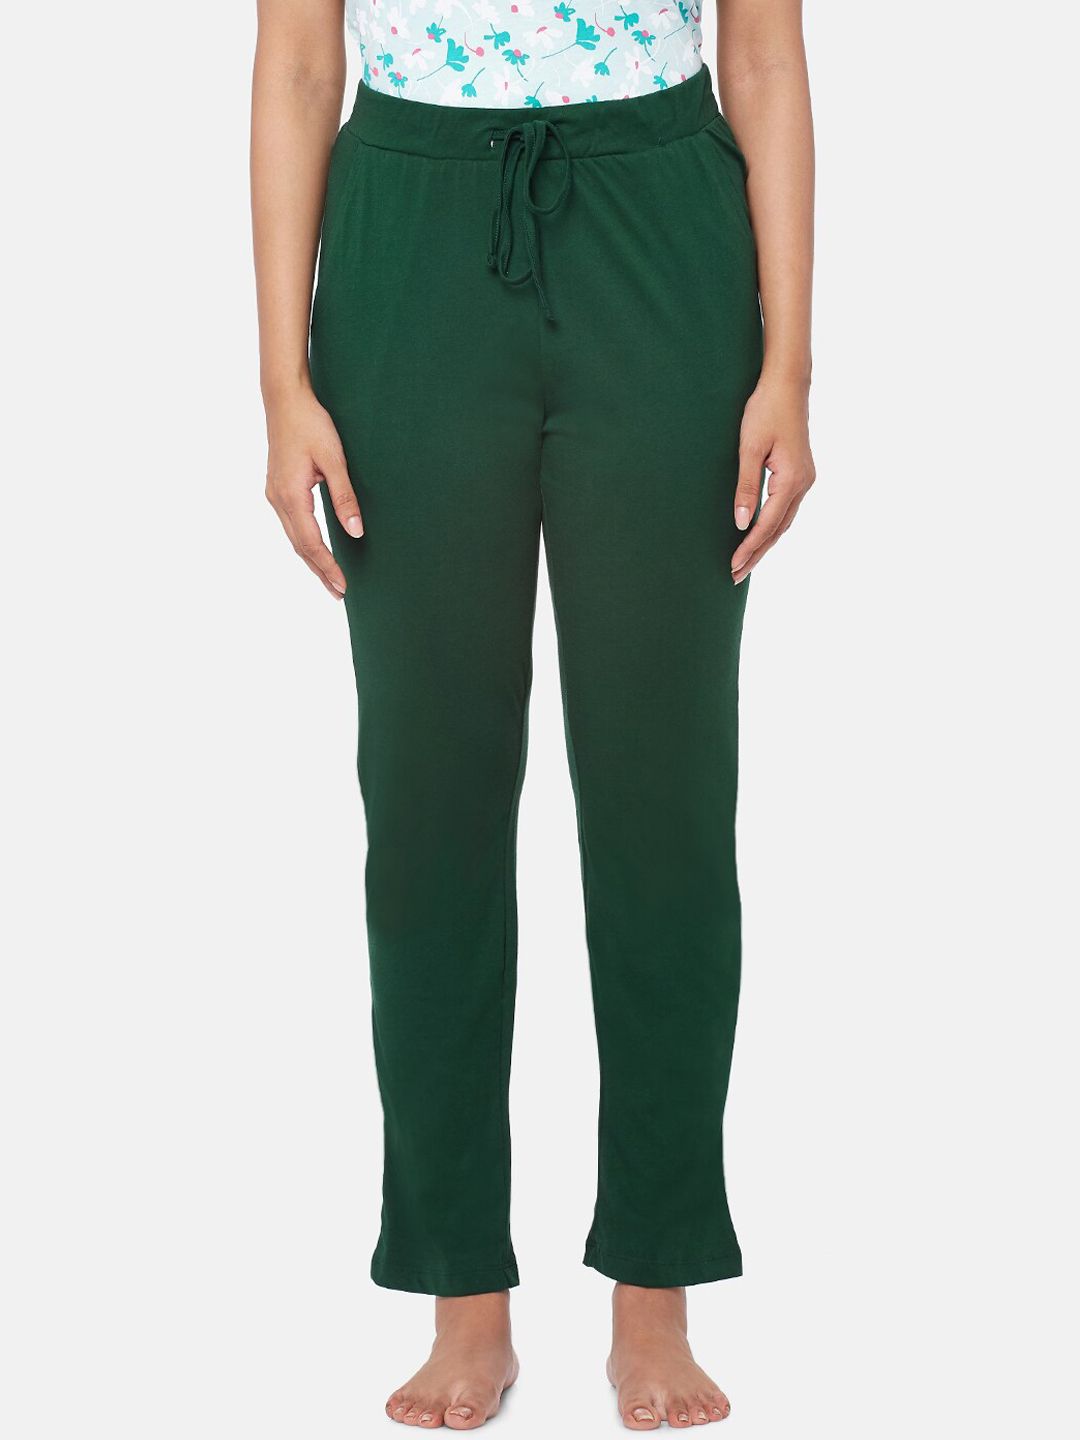 Dreamz by Pantaloons Women Green Solid Lounge Pants Price in India